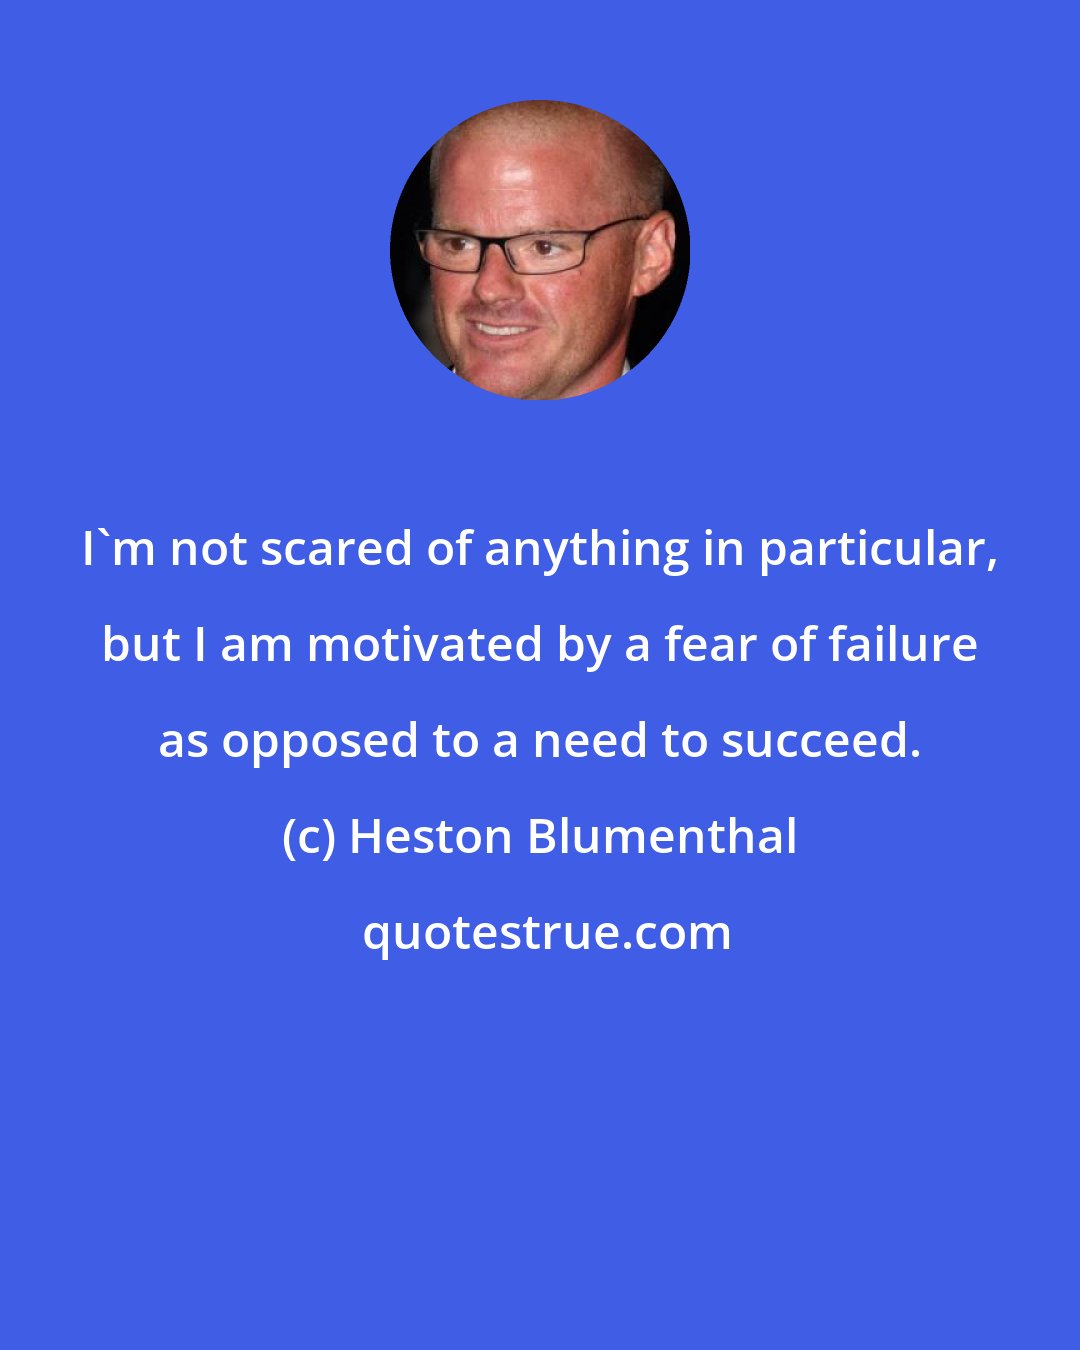 Heston Blumenthal: I'm not scared of anything in particular, but I am motivated by a fear of failure as opposed to a need to succeed.